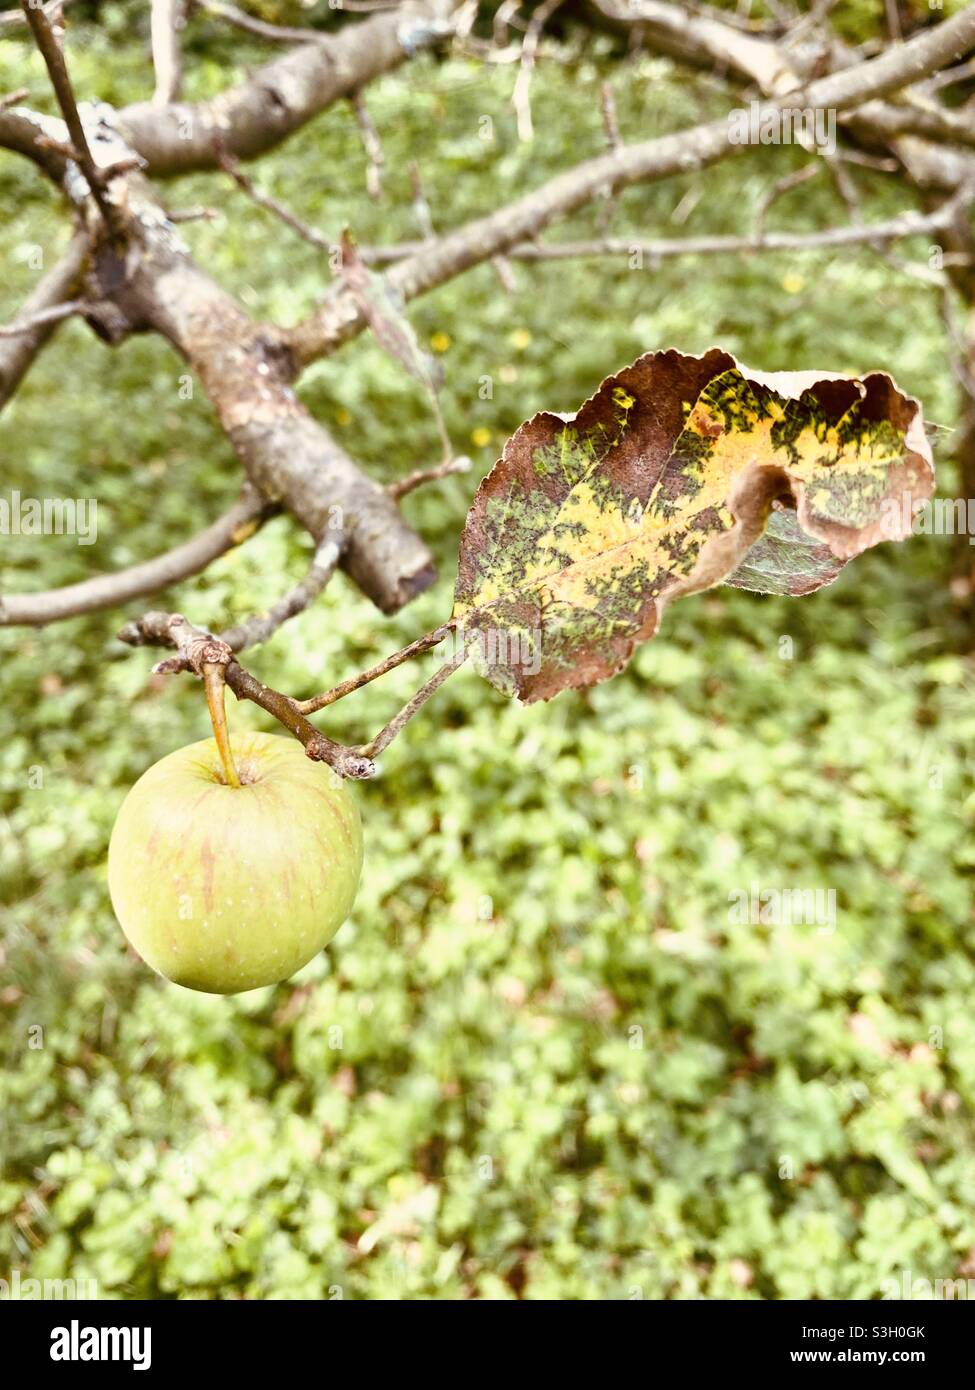 Apple and a colorful leaf on a apple tree branch in the garden nature photography Stock Photo